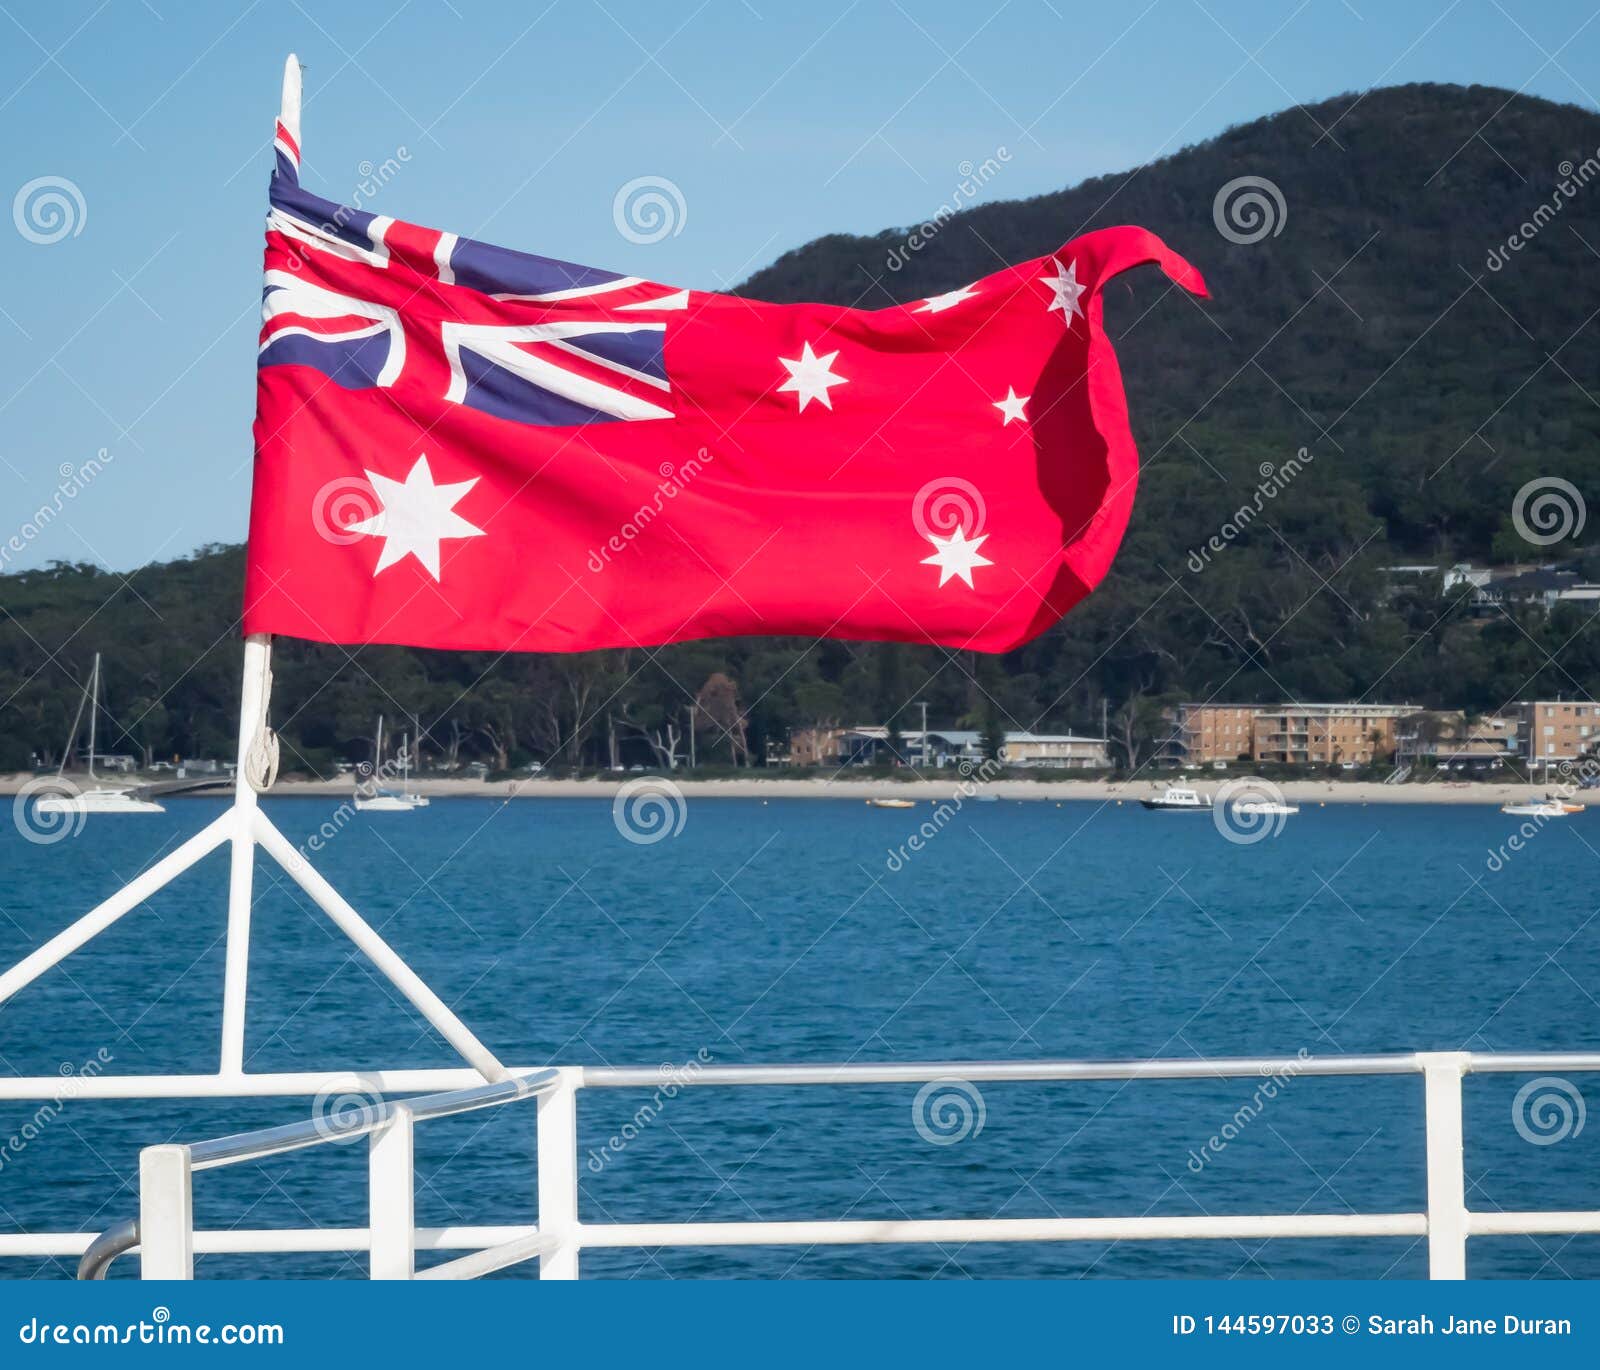 Australian Red Ensign Flag Flying from the Stern of Boat with a Natural Scene in Background Stock Image of stars, scene: